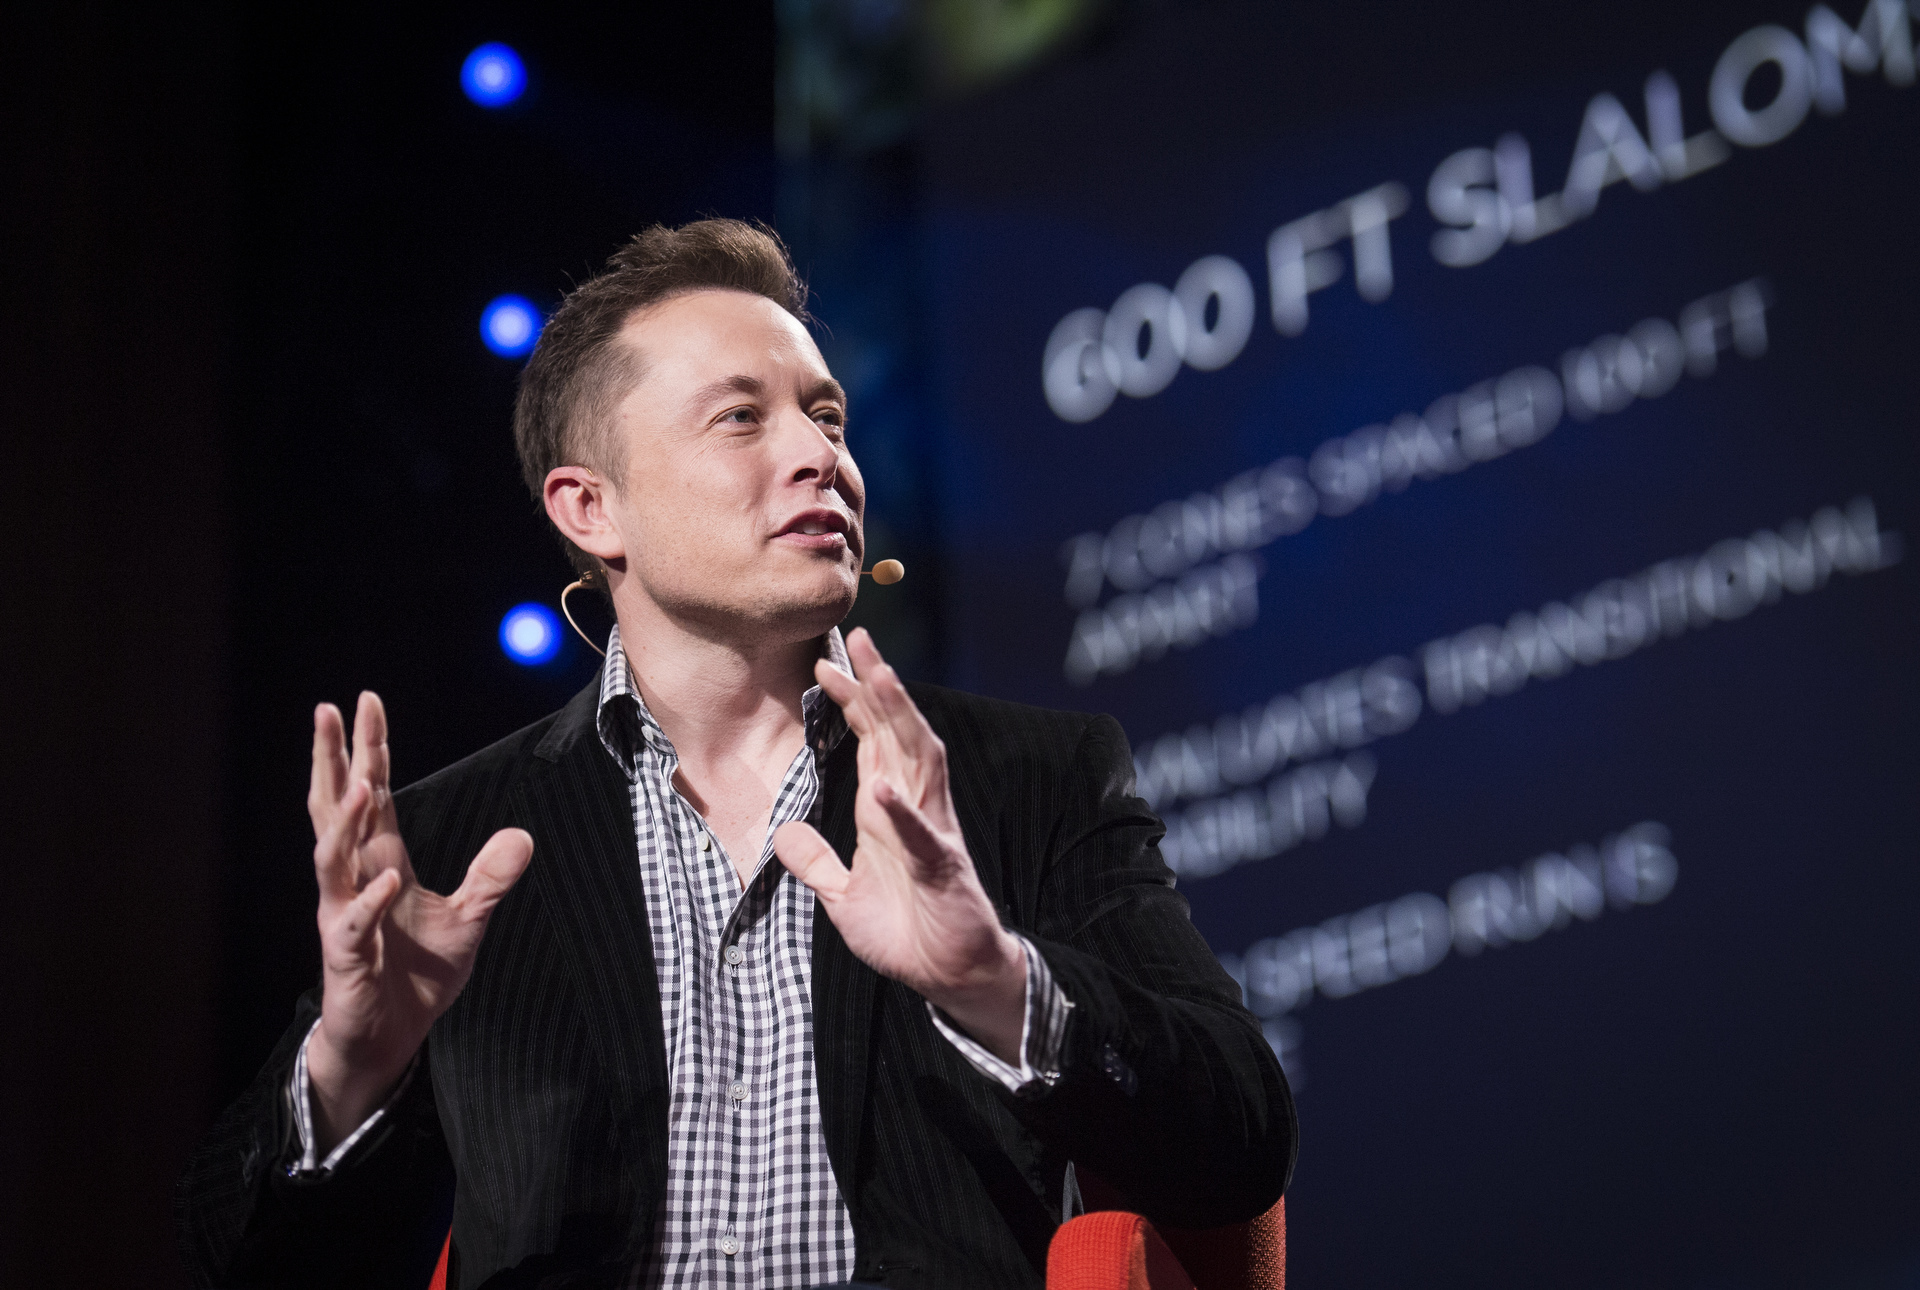 elon musk speaking on stage with microphone